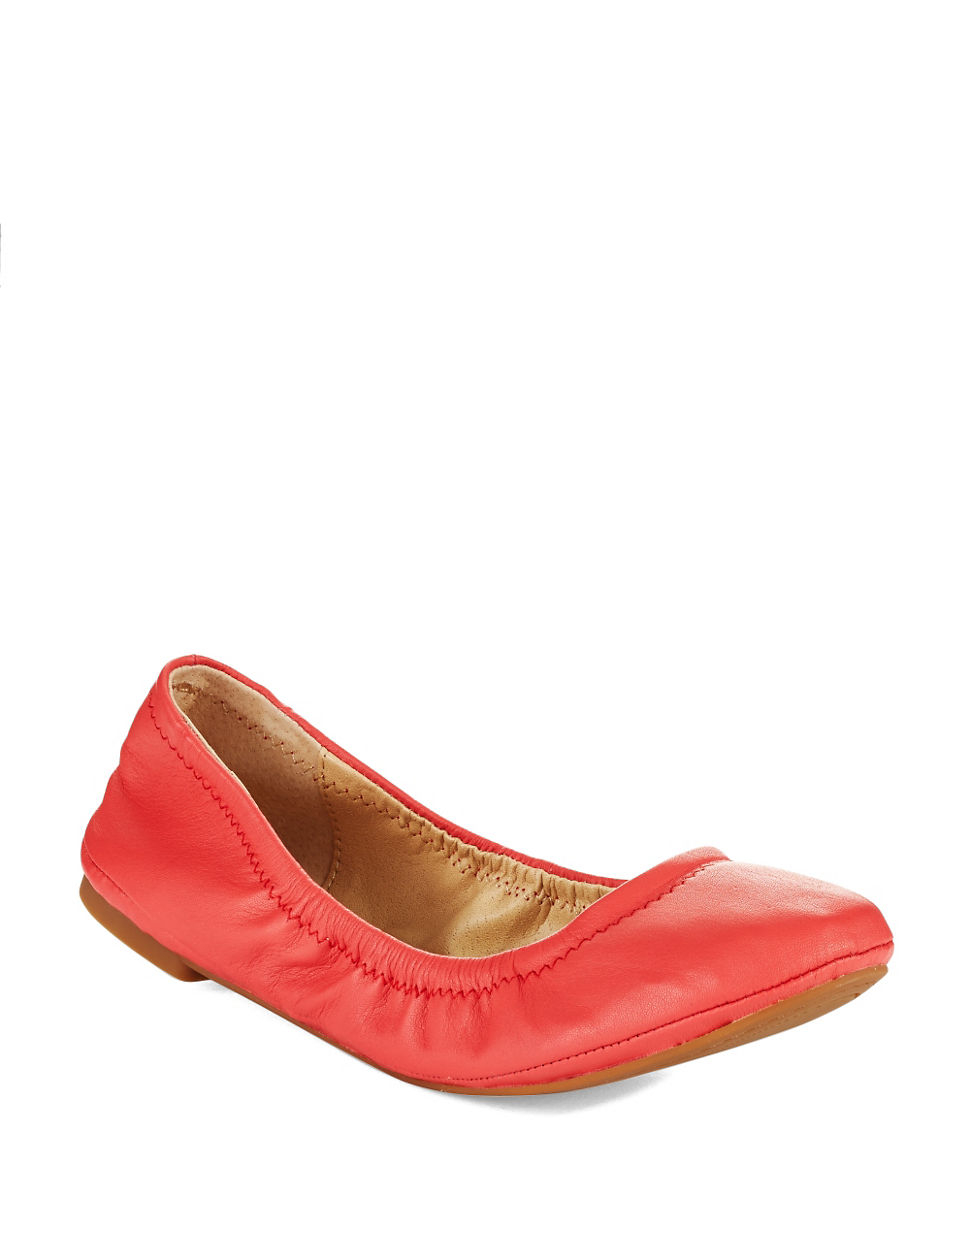 Lyst - Lucky Brand Emmie Ballet Flats in Red